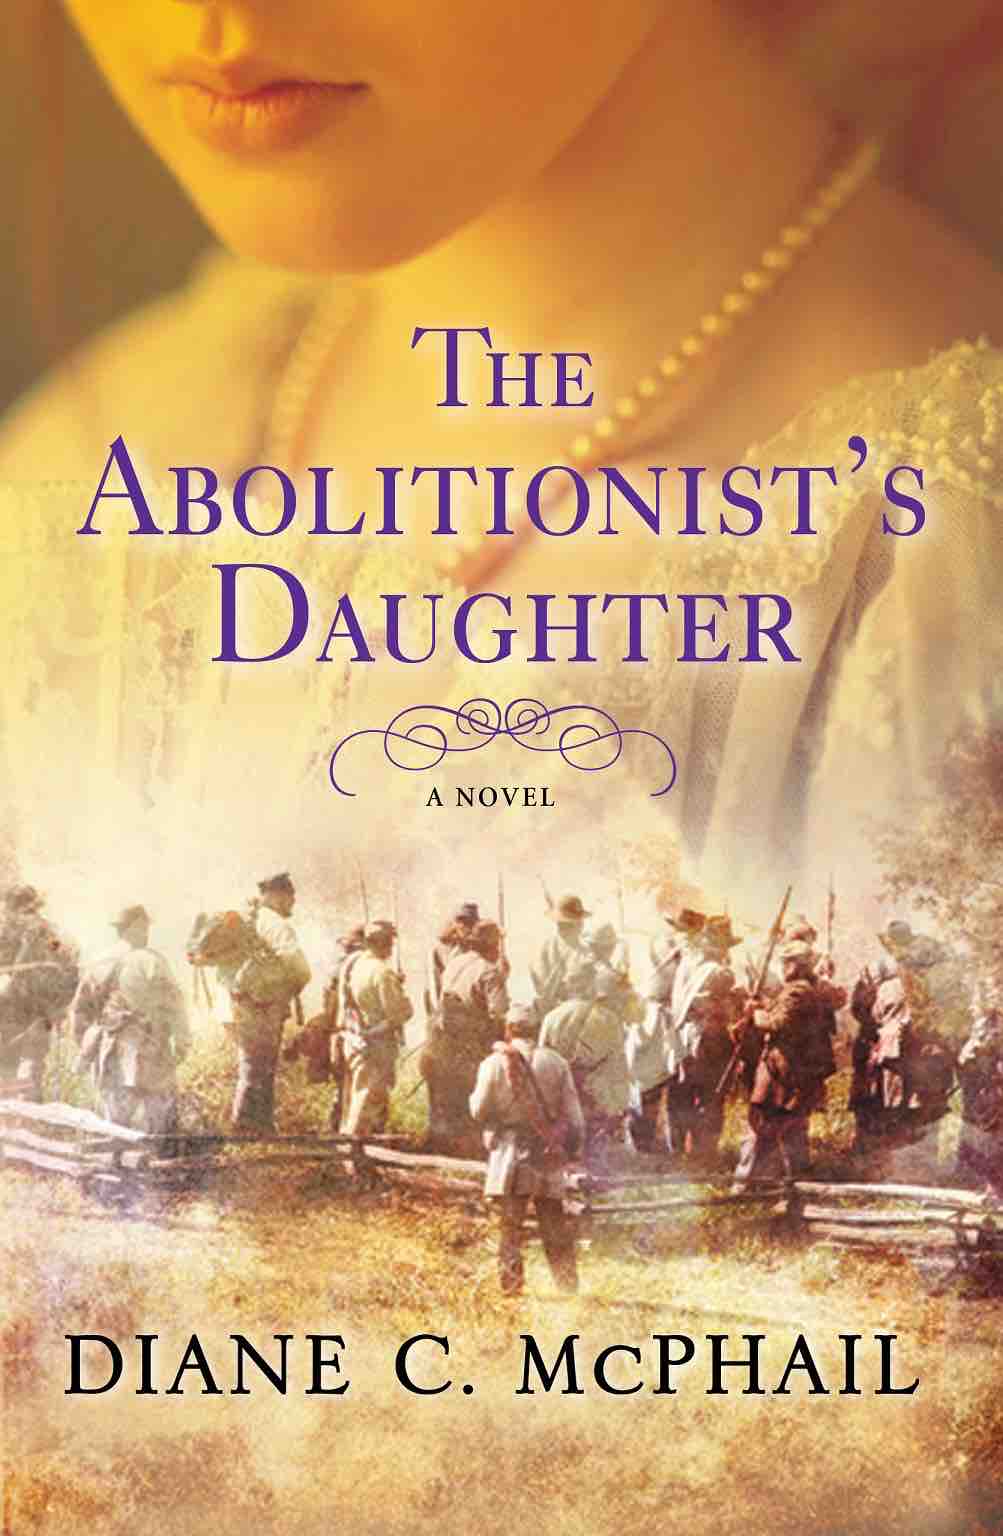 COVER ART - The Abolitionist's Daughter by Diane C. McPhail